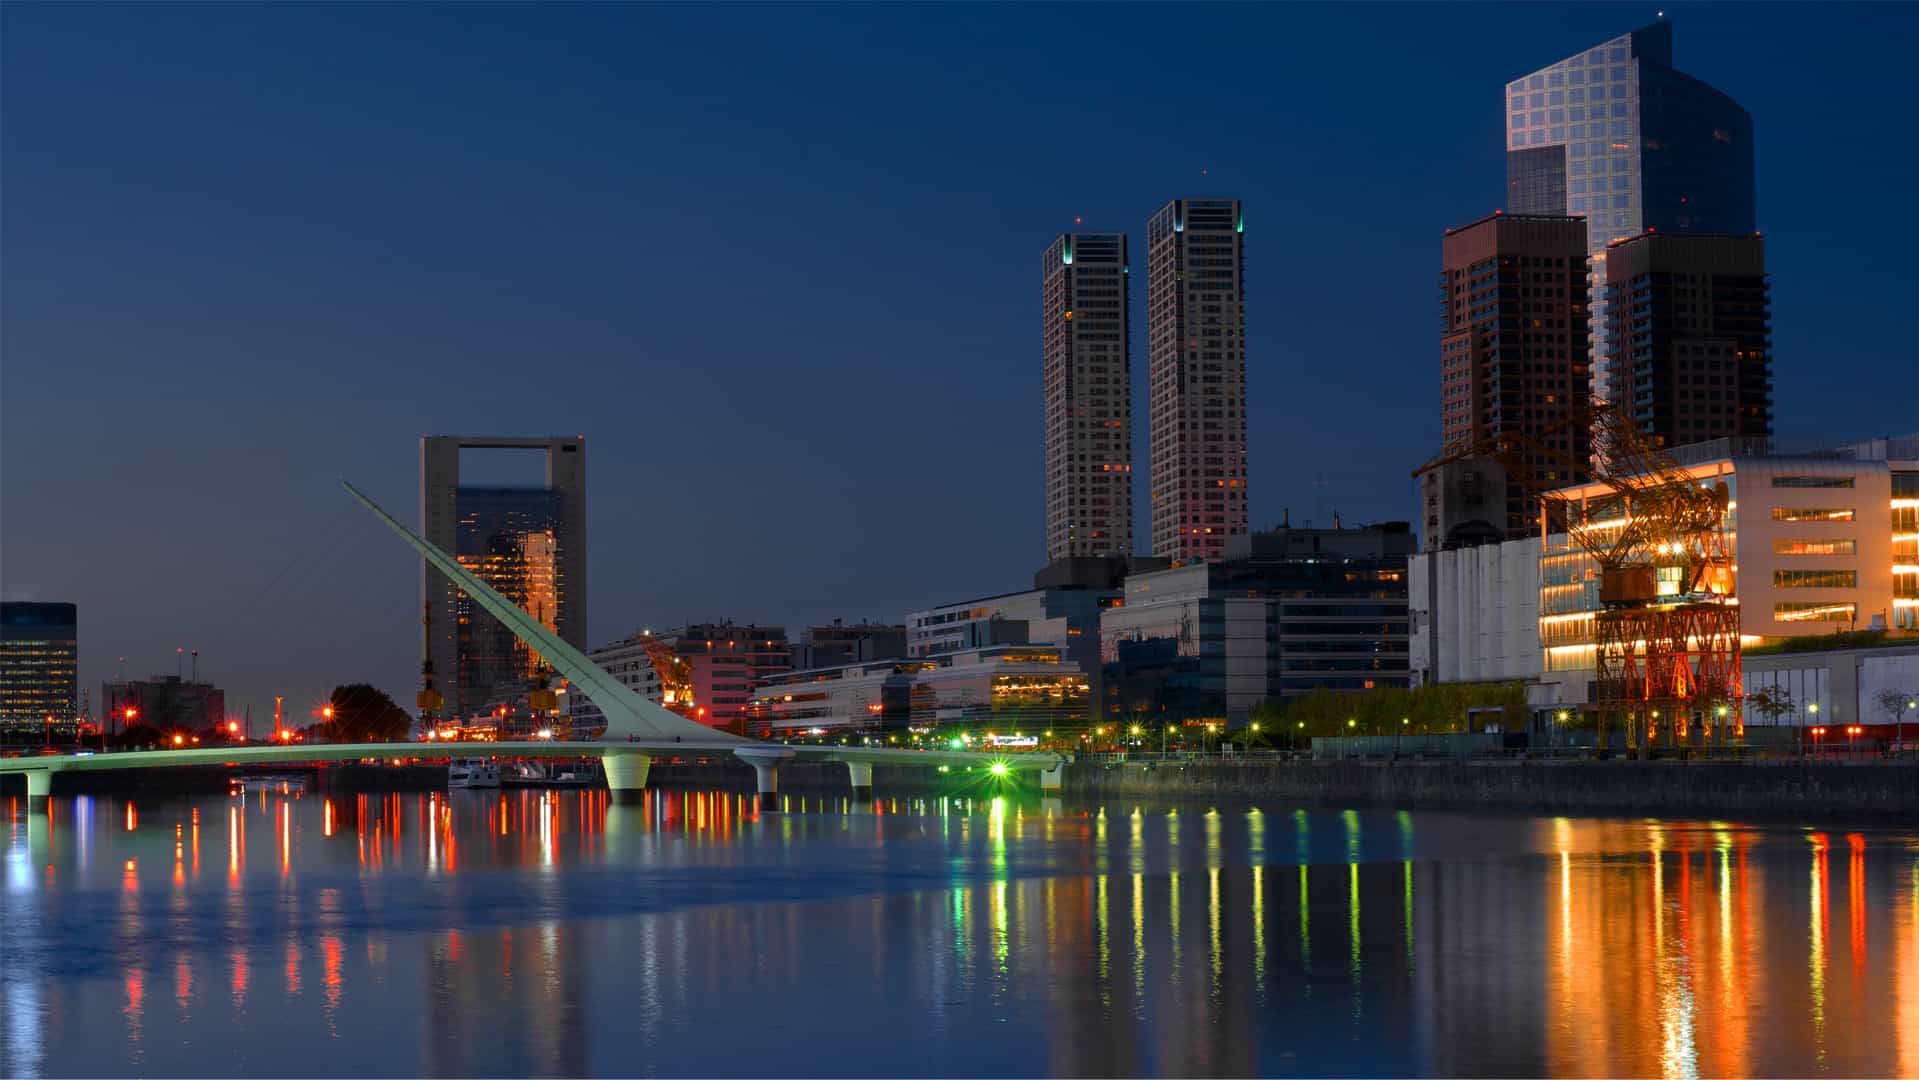 Nighttime photo of Puerto Madero in Buenos Aires, Argentina.